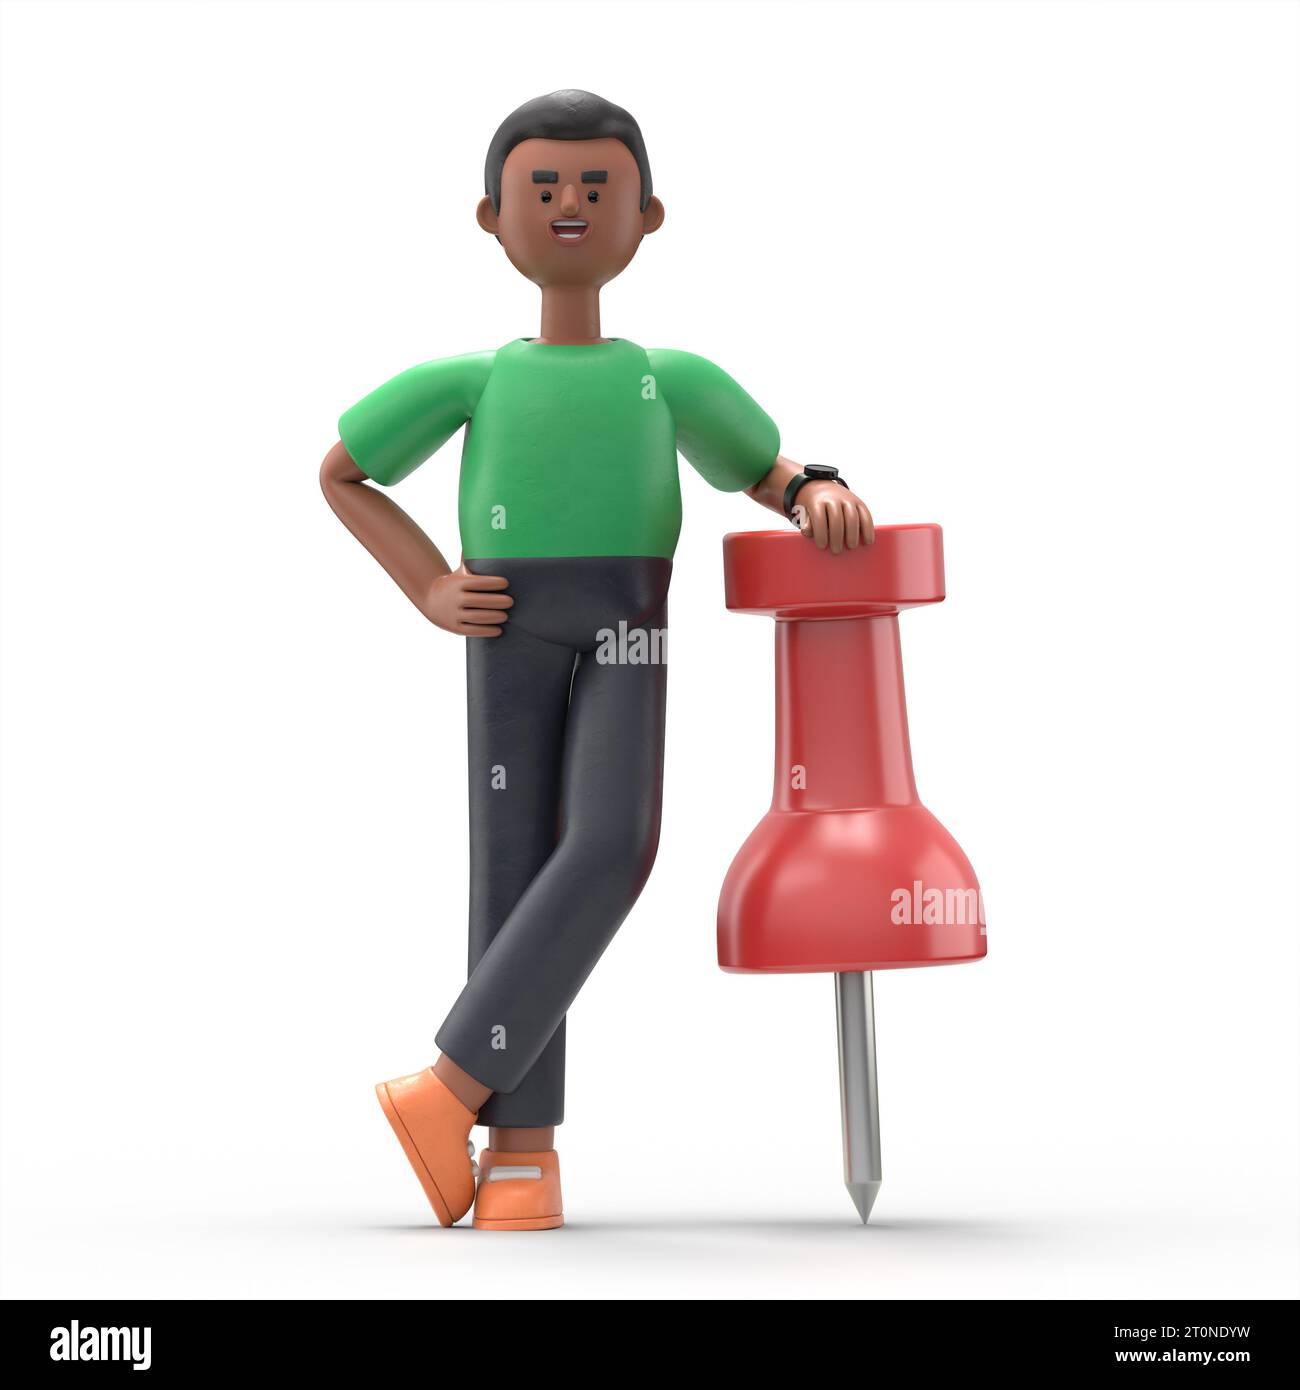 3D illustration of afro man David figure with pin needle.3D rendering on white background. Stock Photo